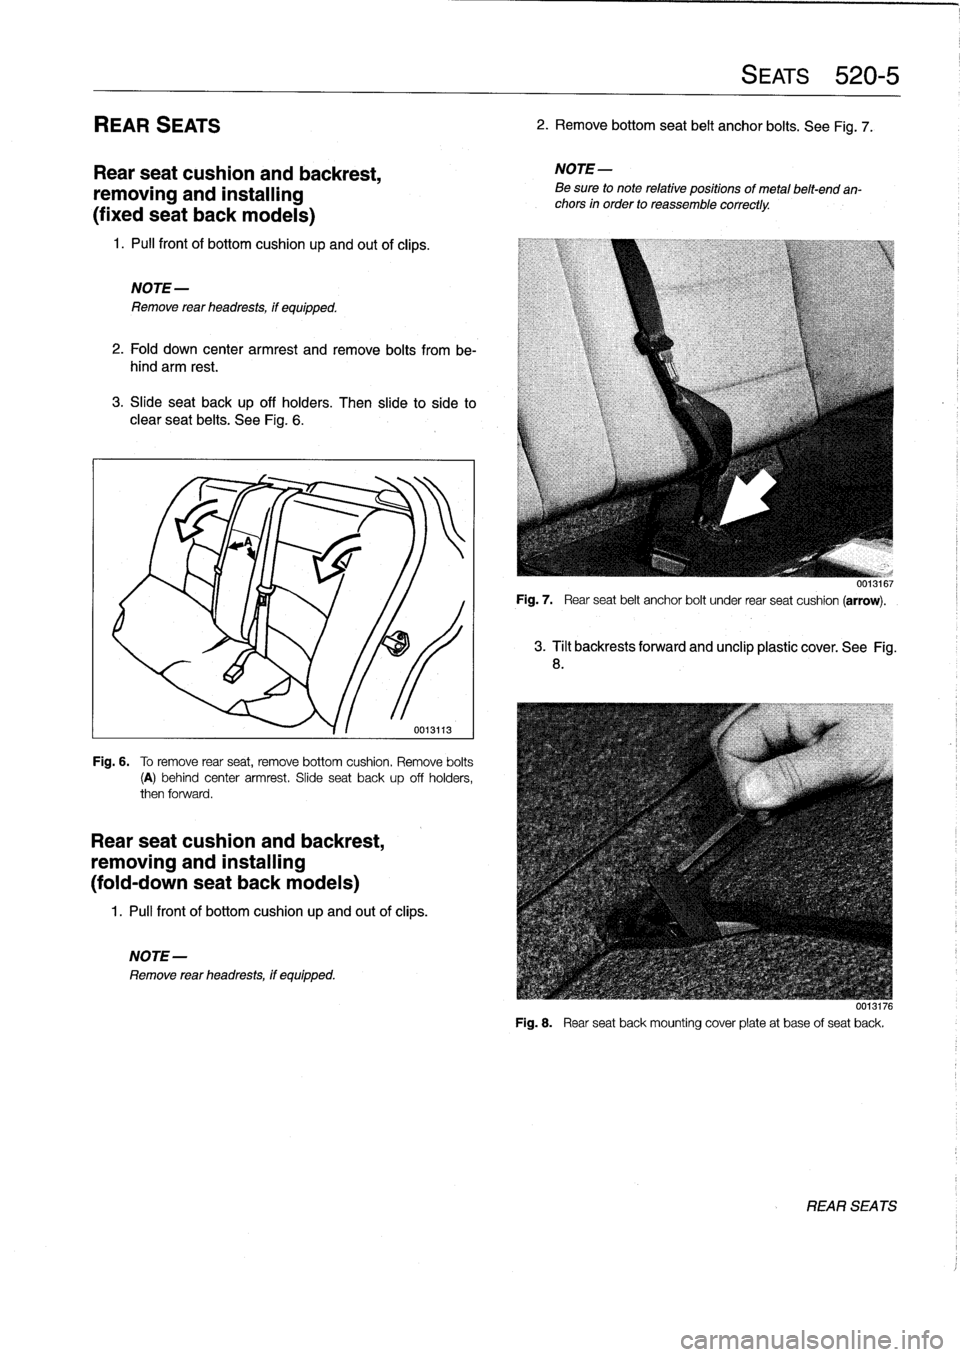 BMW M3 1996 E36 Workshop Manual 
REAR
SEATS

Rear
seat
cushion
and
backrest,

removing
and
installing

(fixed
seat
back
modeis)

1
.
Pull
front
of
bottomcushion
up
and
out
of
clips
.

NOTE-

Remove
rear
headrests,
if
equipped
.

2
.